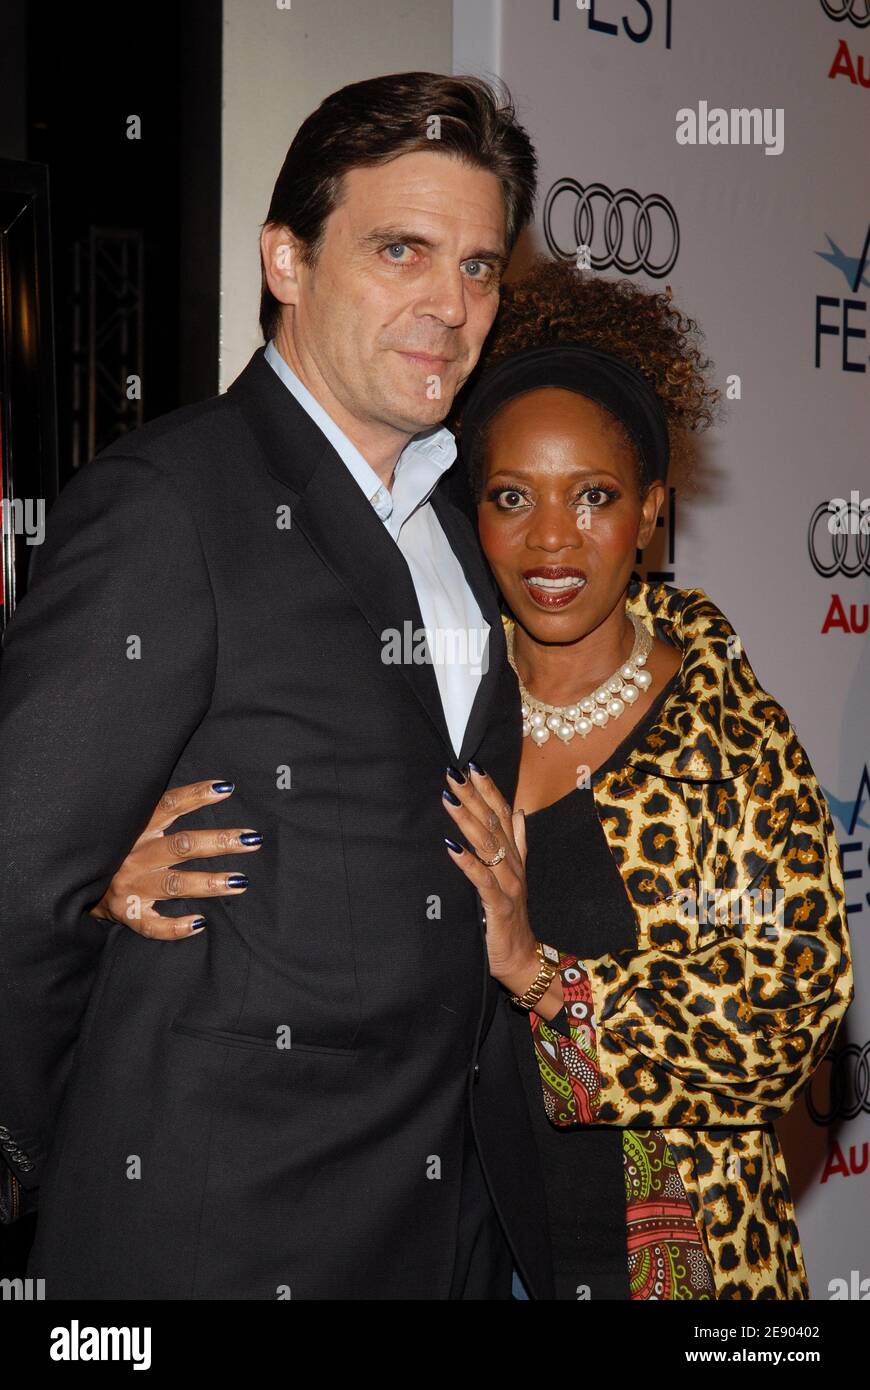 Roderick Spencer and Alfre Woodard attend the screening of 'Love